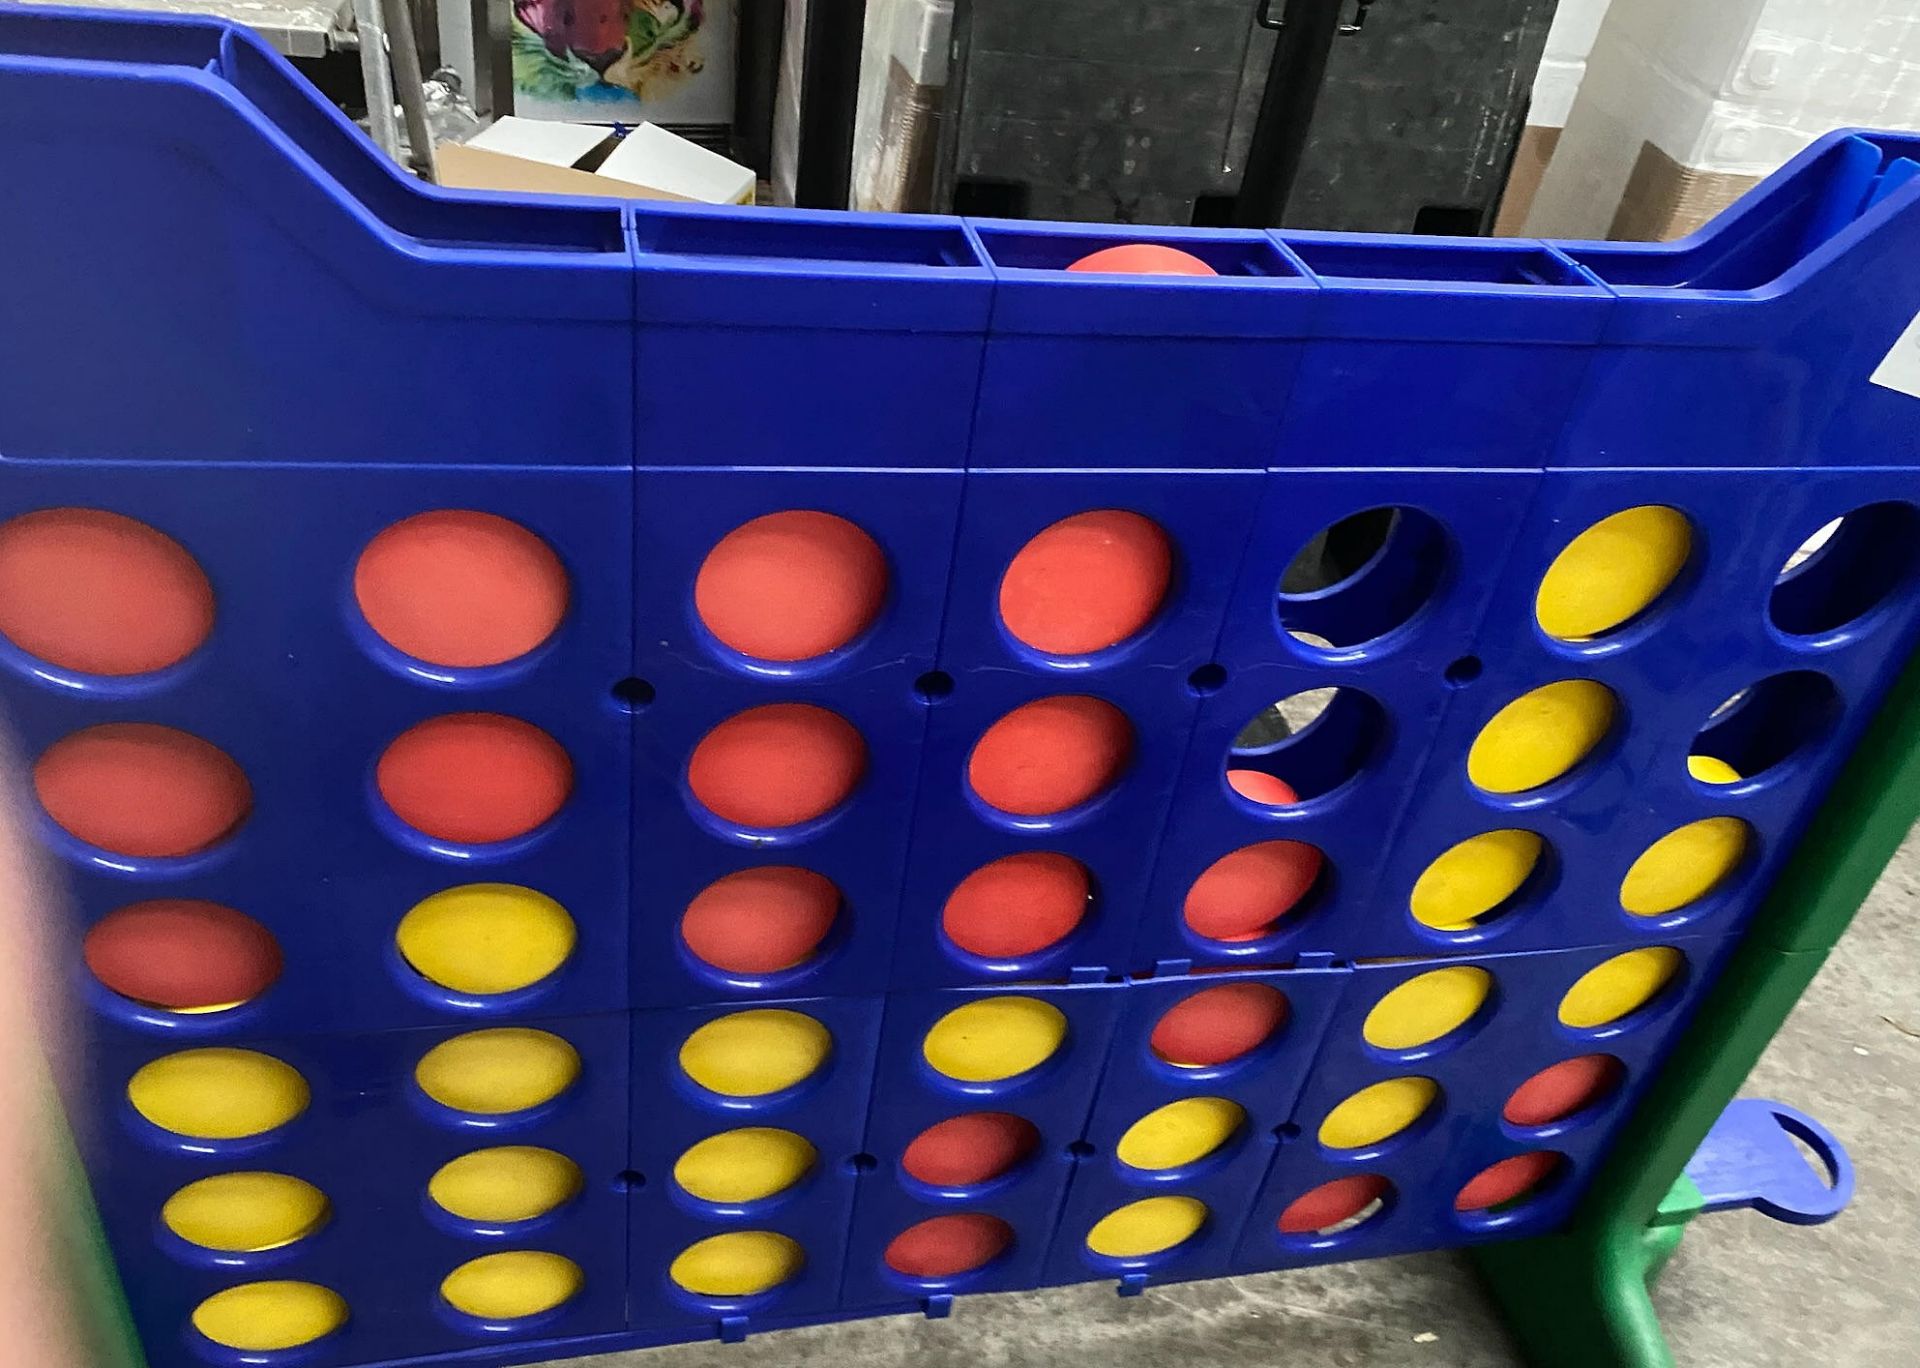 1 x Giant Connect 4 Game - Suitable For Indoor or Outdoor Use - Image 2 of 2